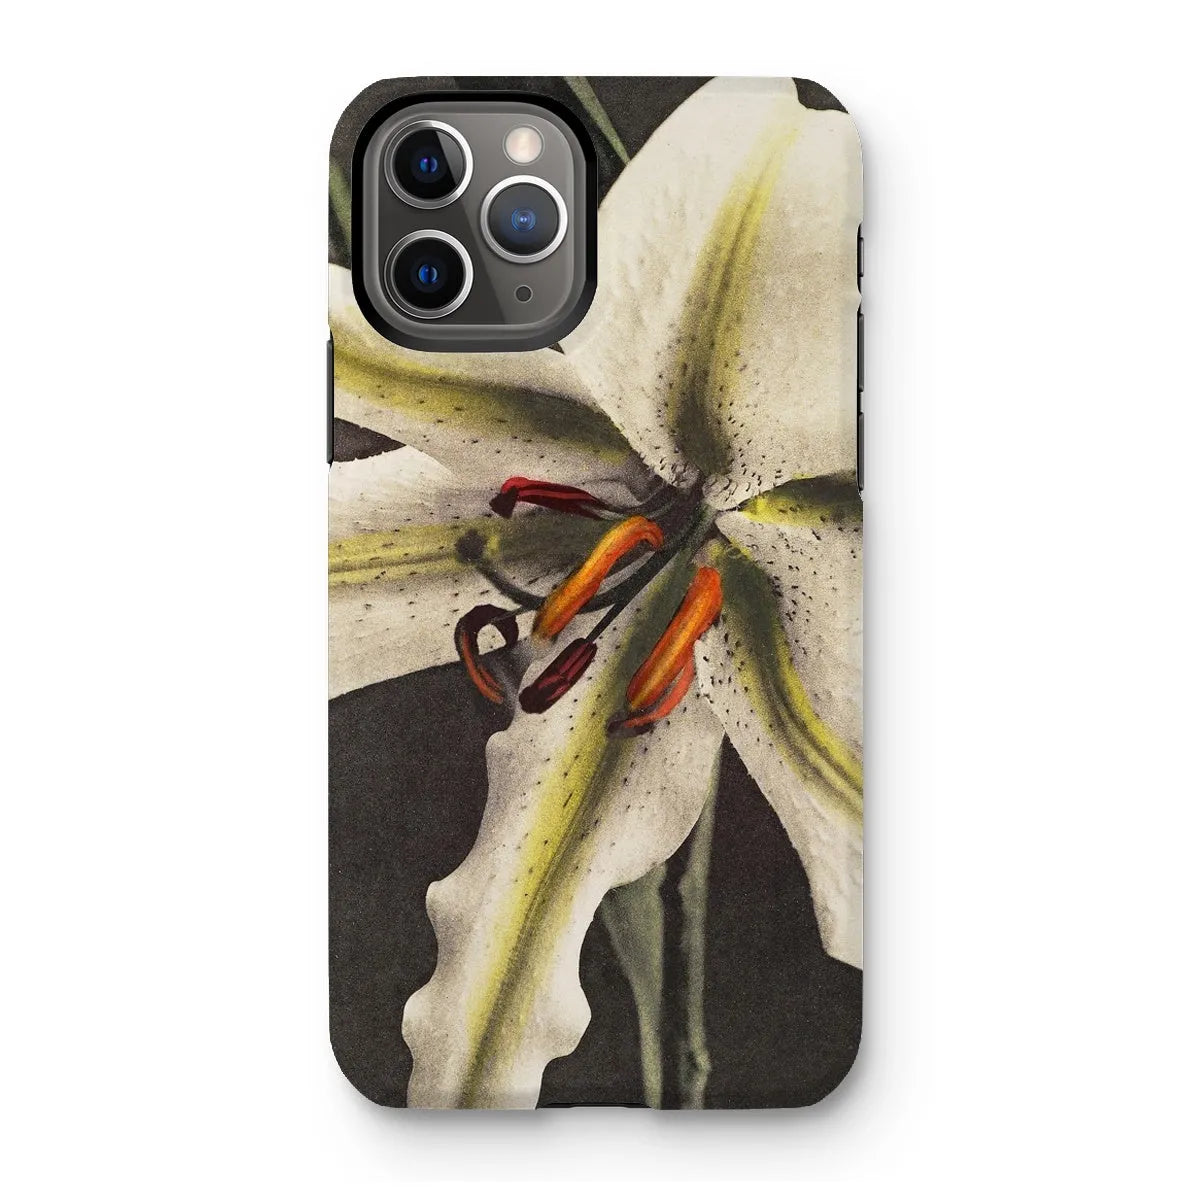 Lily By Kazumasa Ogawa Art Phone Case - Iphone 11 Pro / Matte - Mobile Phone Cases - Aesthetic Art